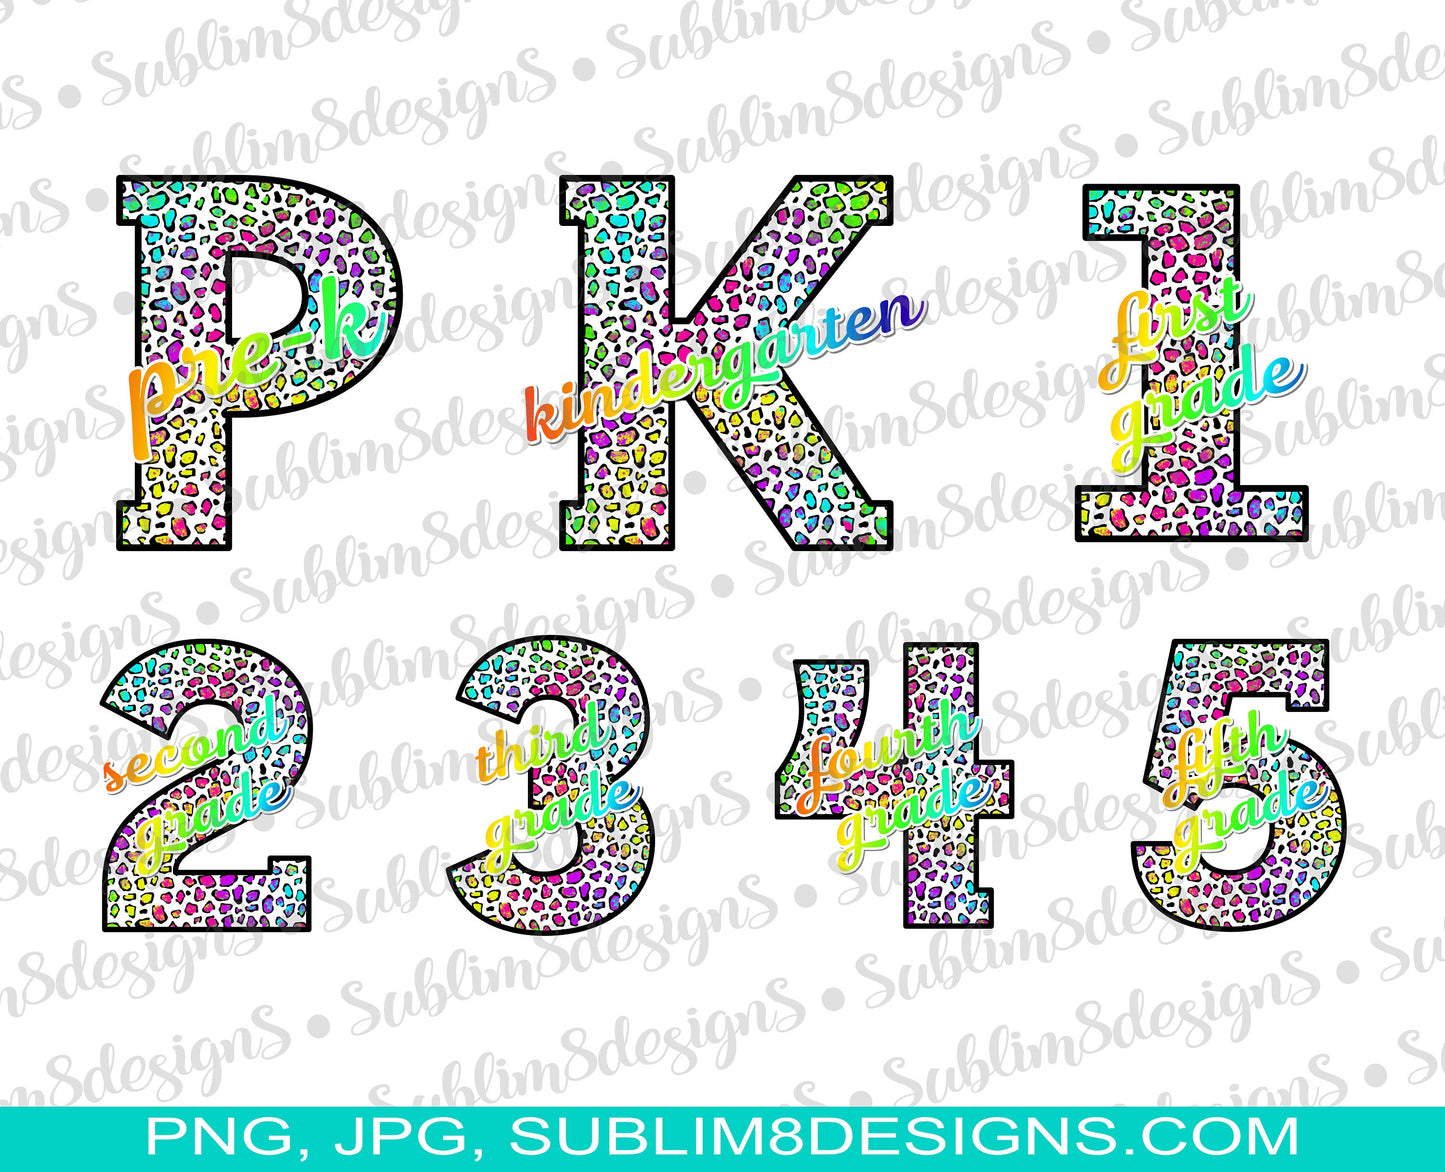 Pre-K, Kindergarten, First Grade, Second Grade, Third Grade, Fourth Grade and Fifth Grade Lettering PNG and JPG ONLY